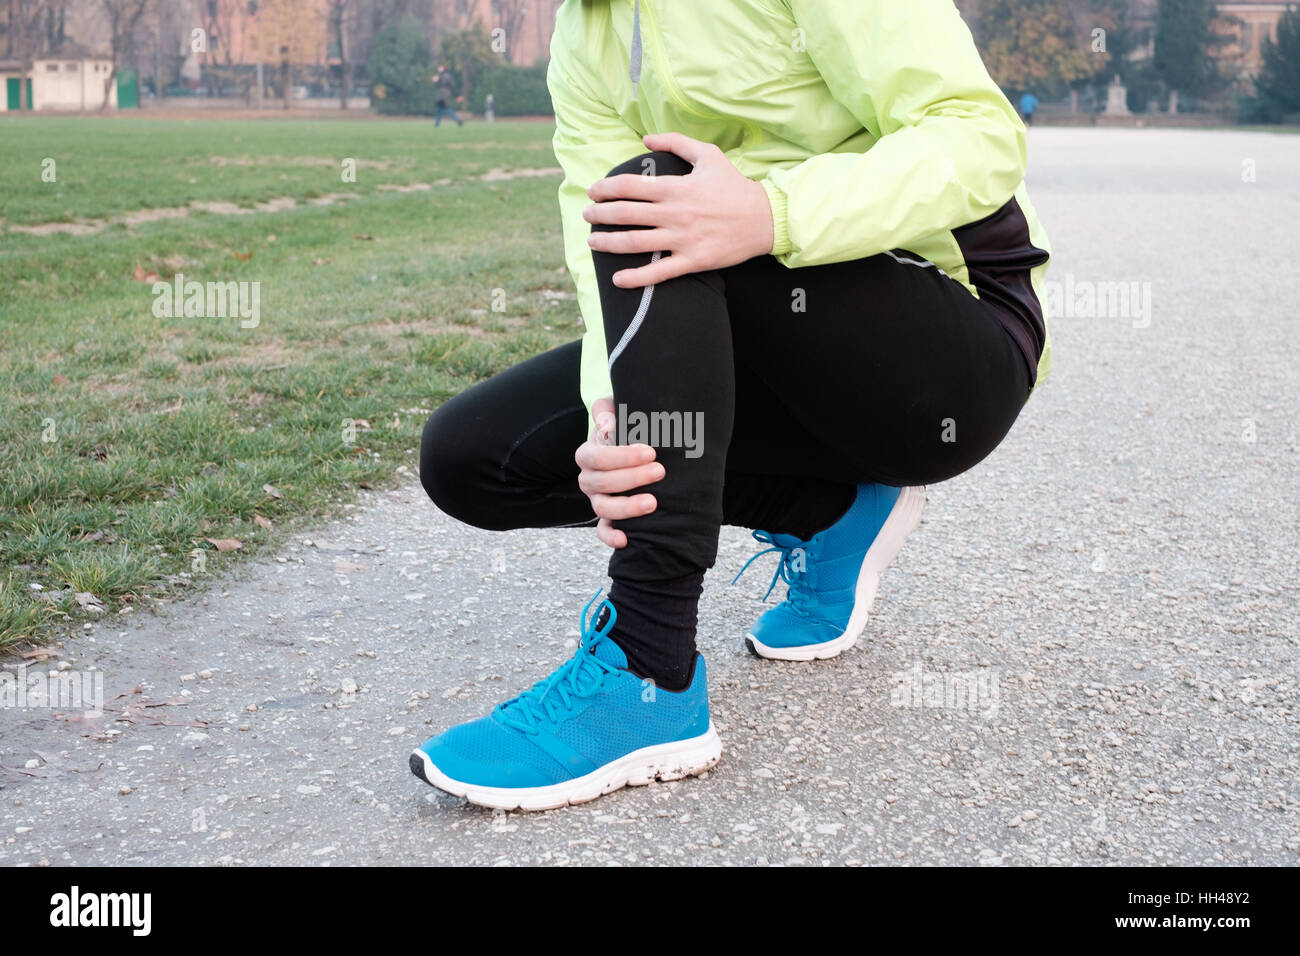 Runner with injured ankle while training in the city park in cold weather Stock Photo